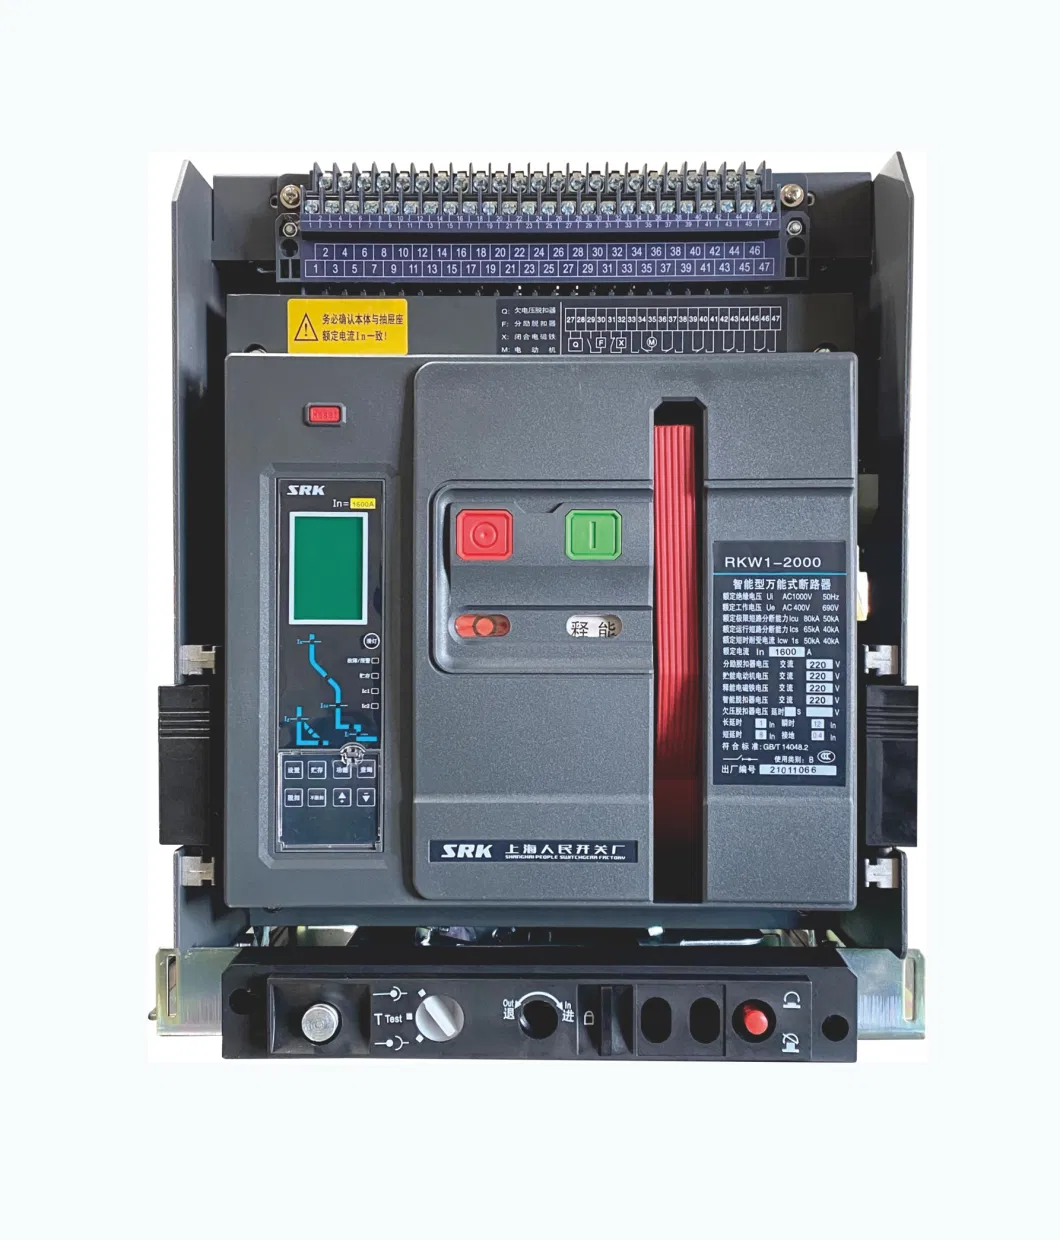 China Top 500 Enterprise Dw45 Rkw1-6300 4p 4000A Fixed Type Intelligent Universal Air Circuit Breaker Acb